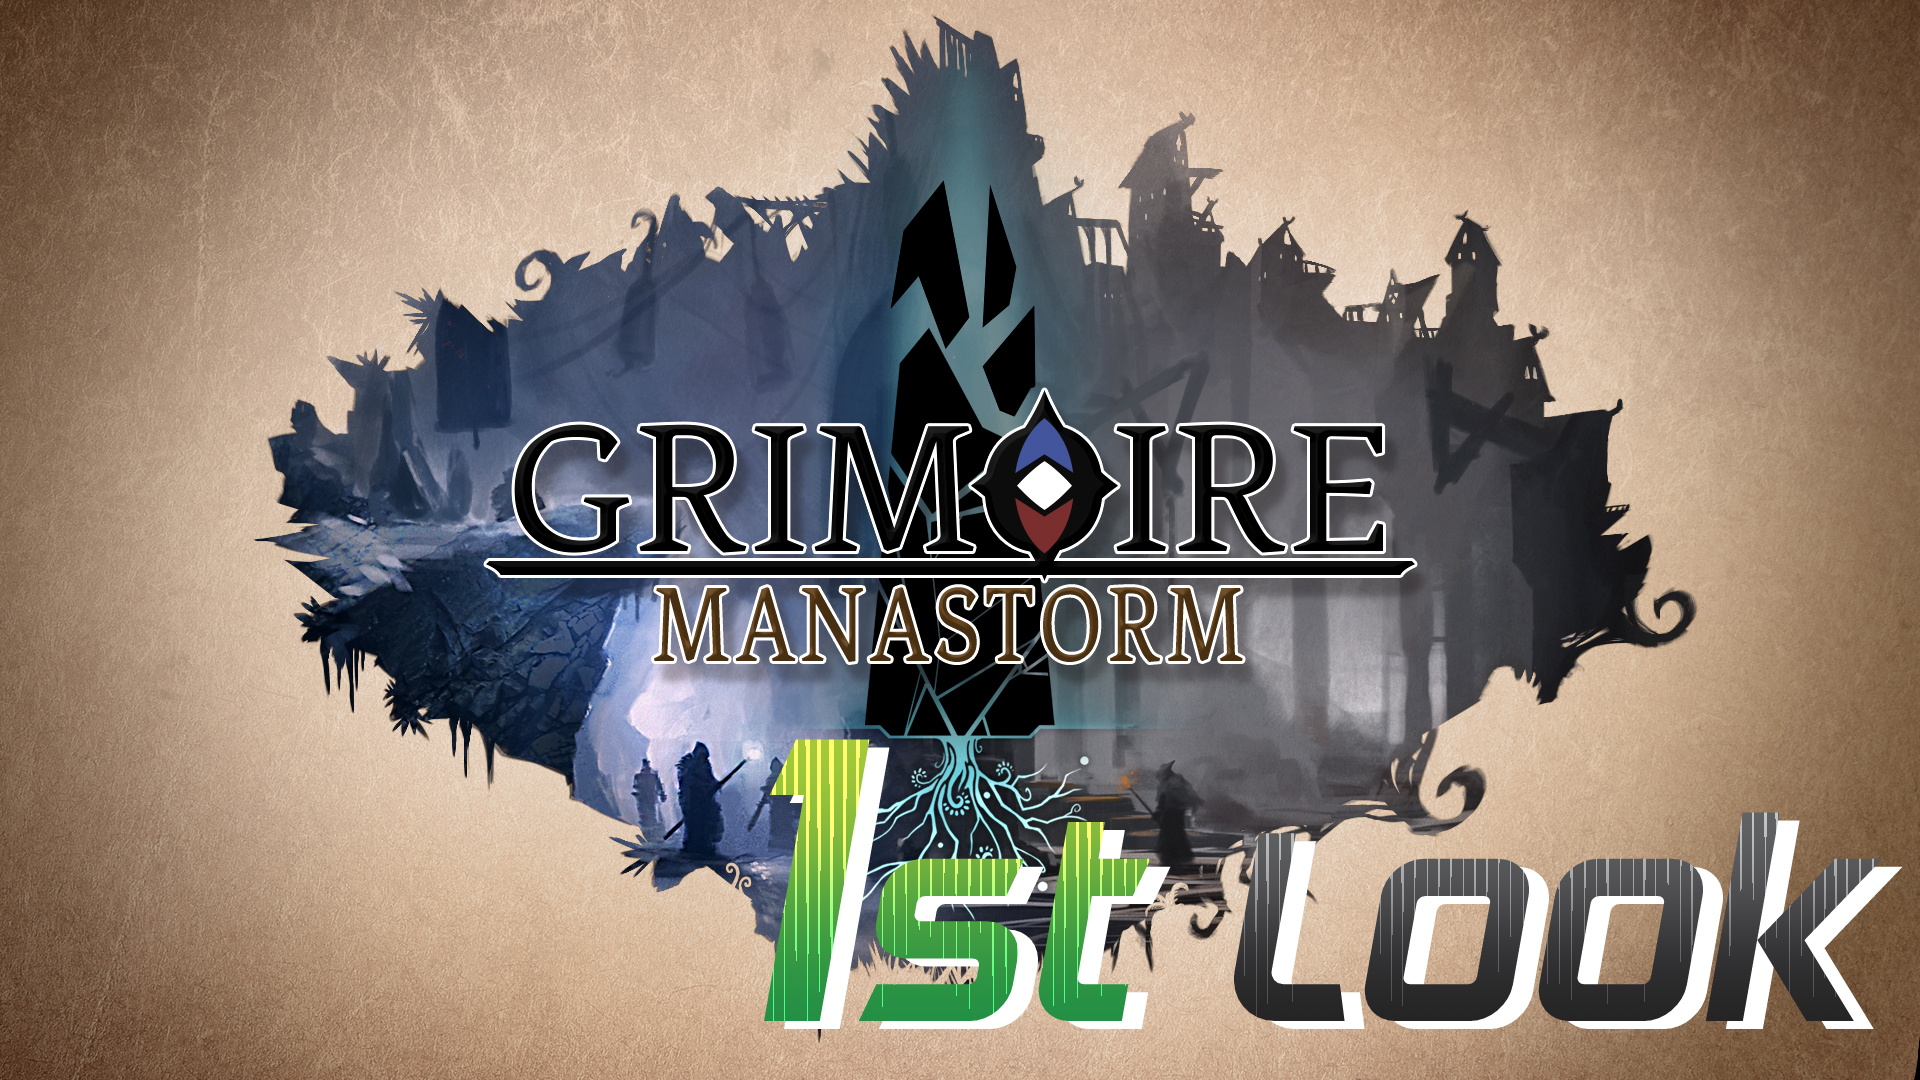 Colt takes a first look at Grimoire: Manastorm